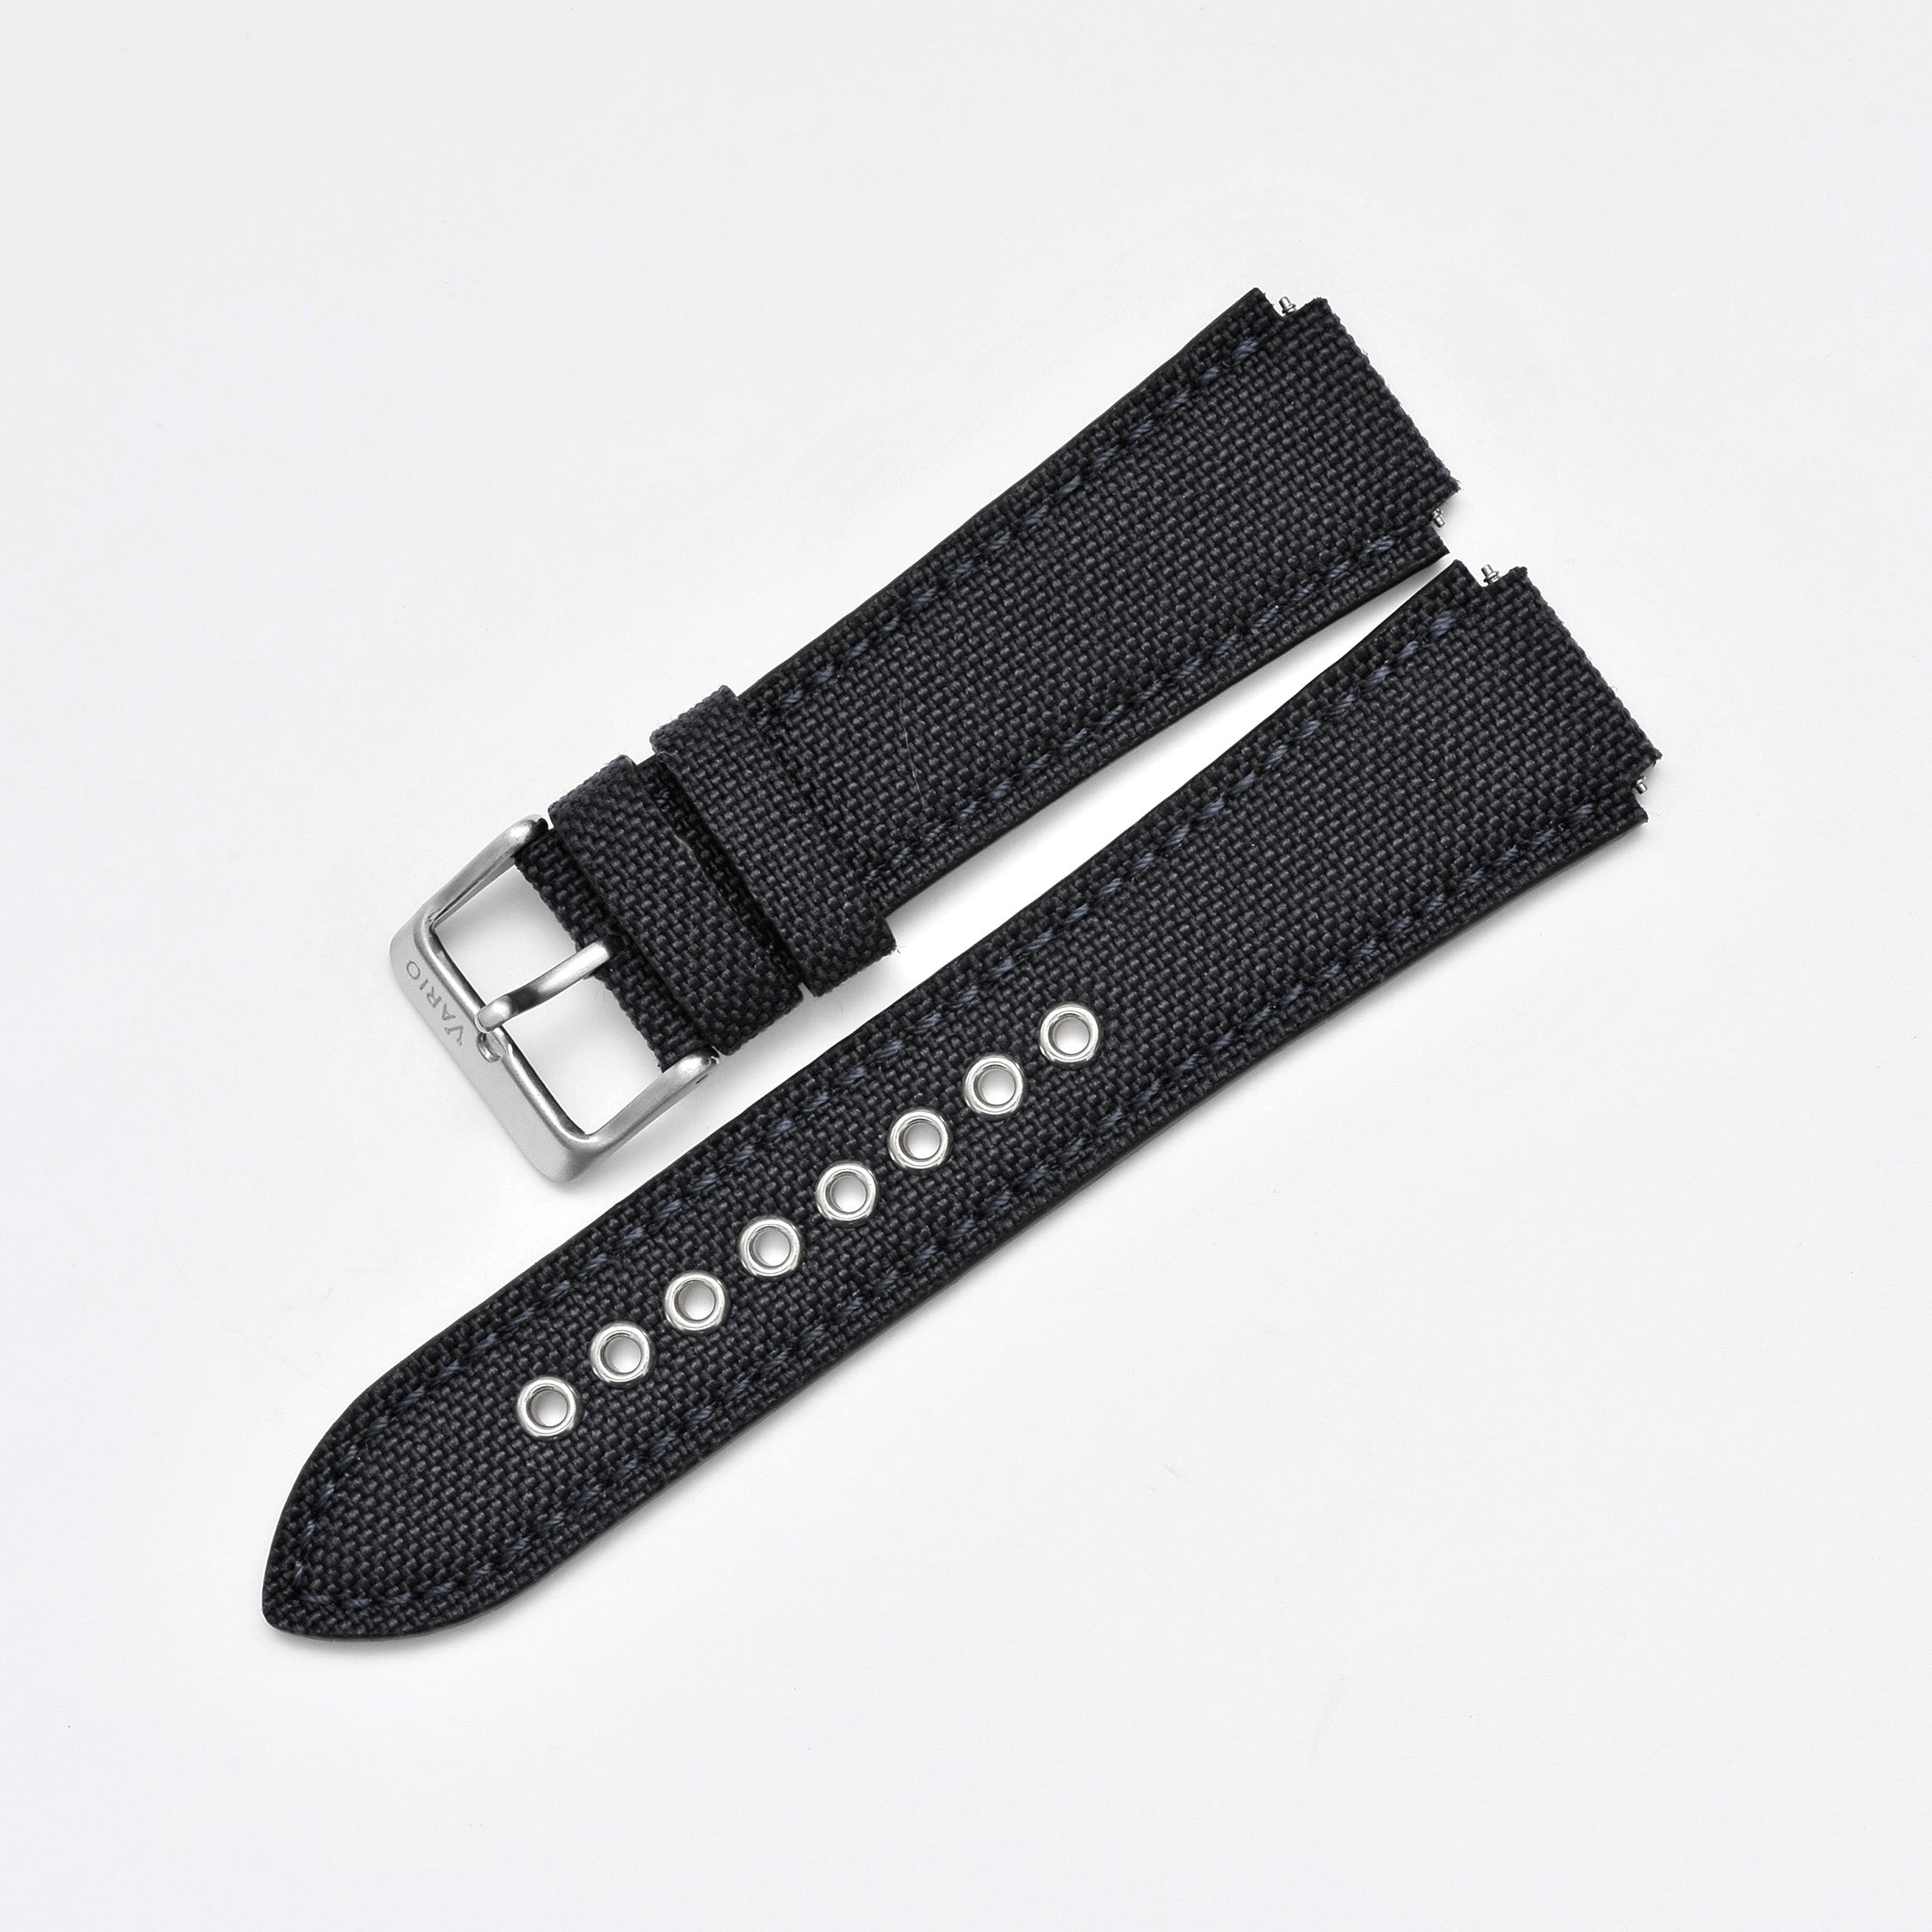 Cordura black fitted watch strap for Casio Royale AE1200 